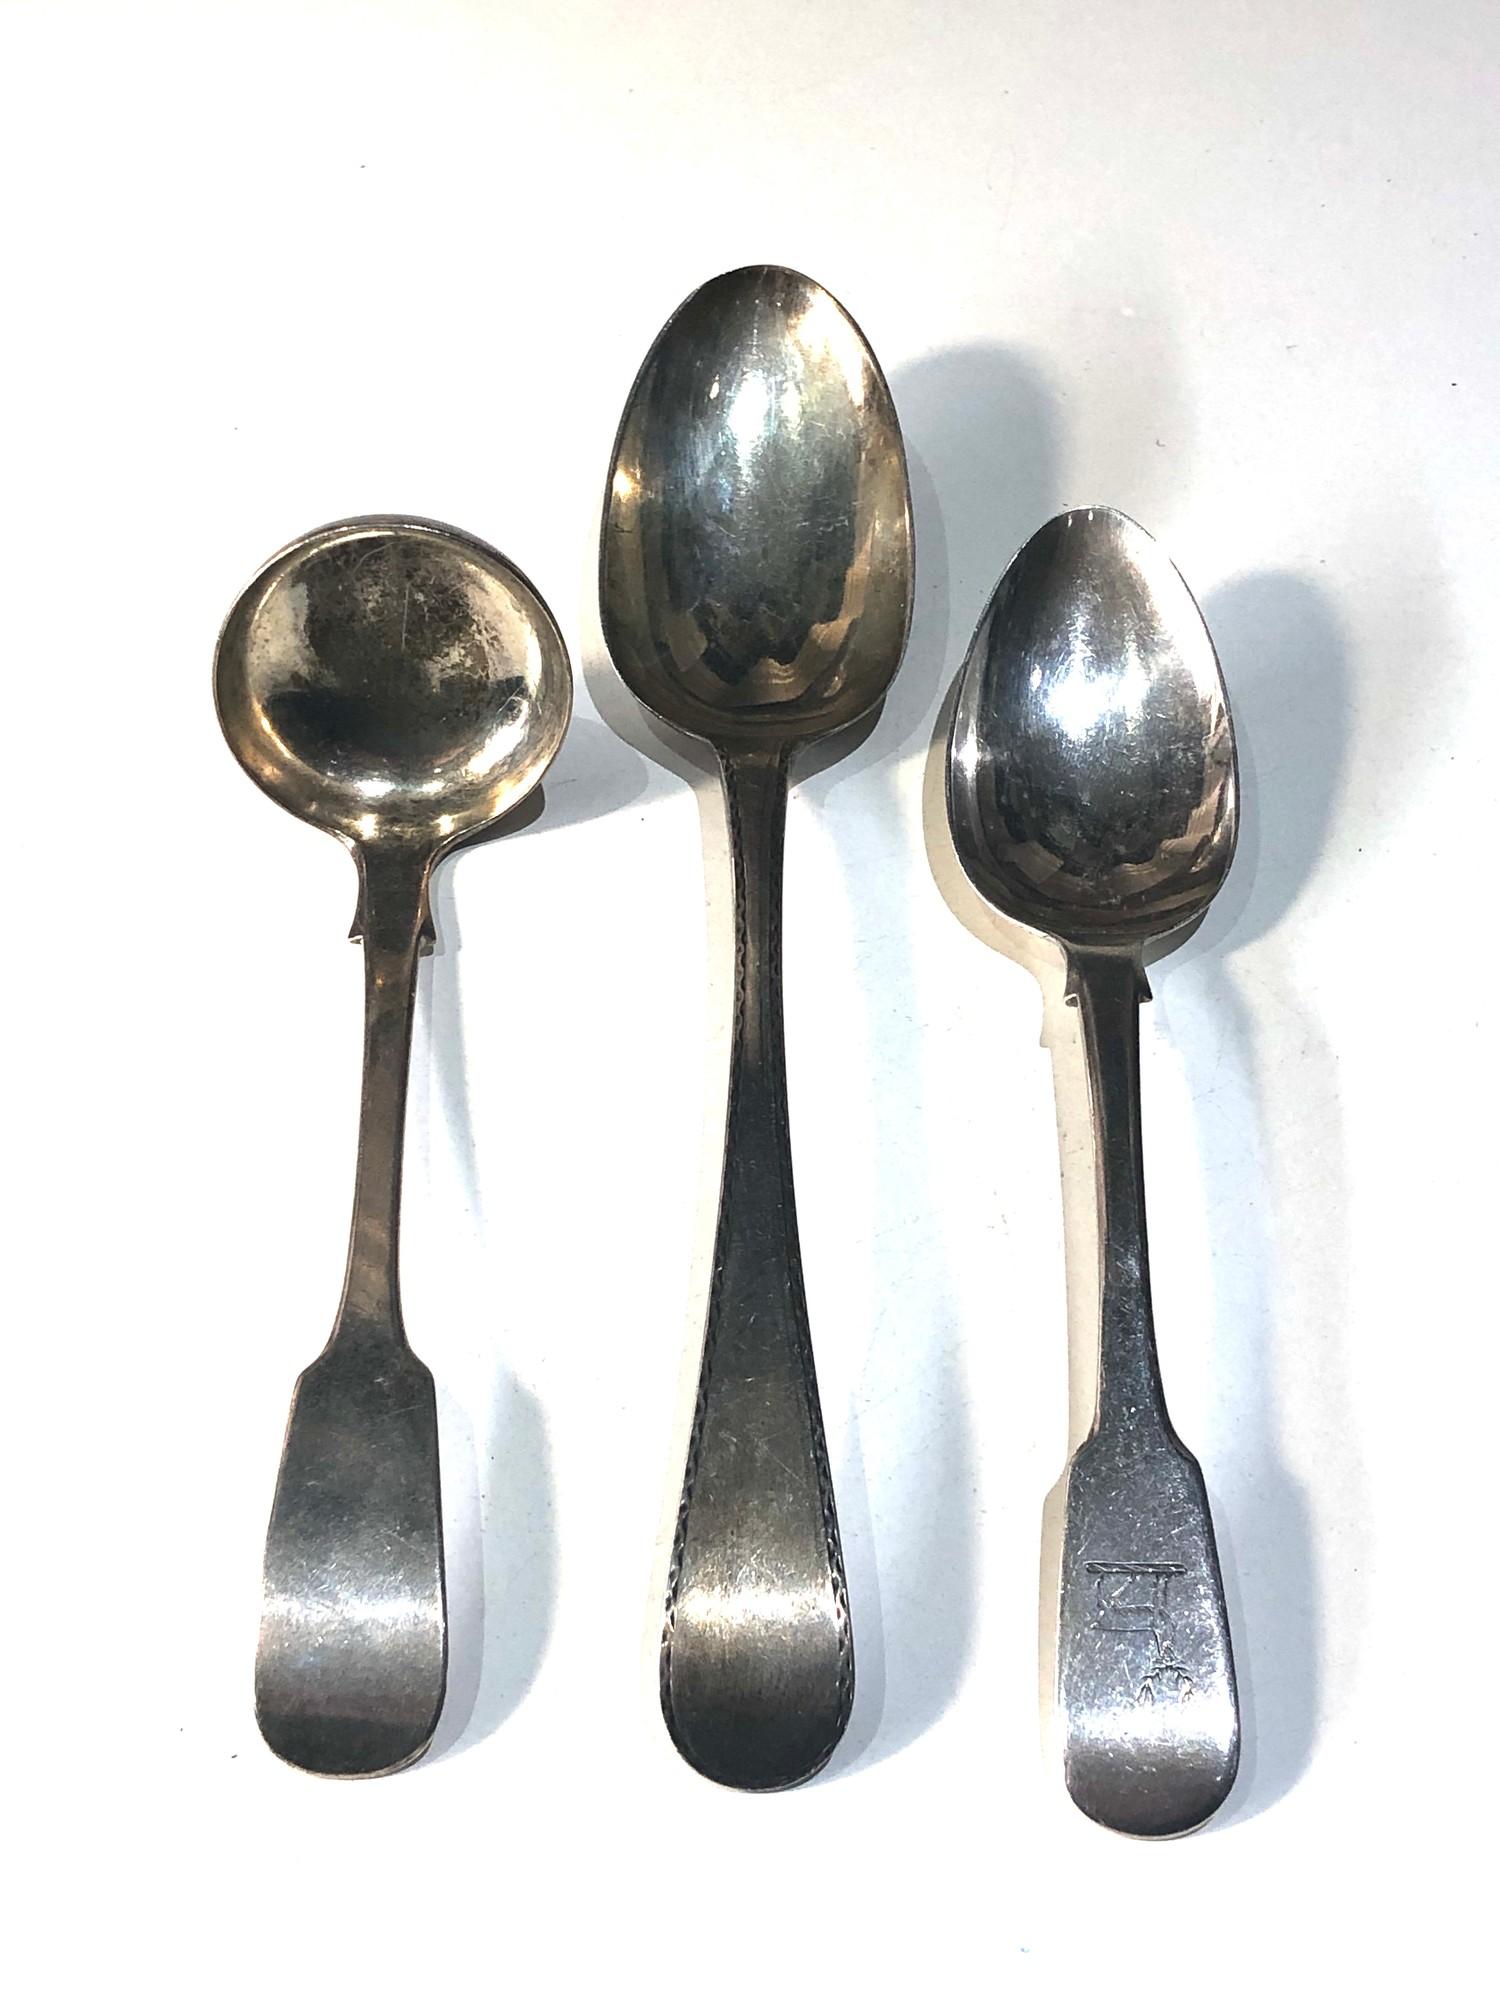 3 antique silver spoons includes 18th century silver table spoon antique irish silver table spoon